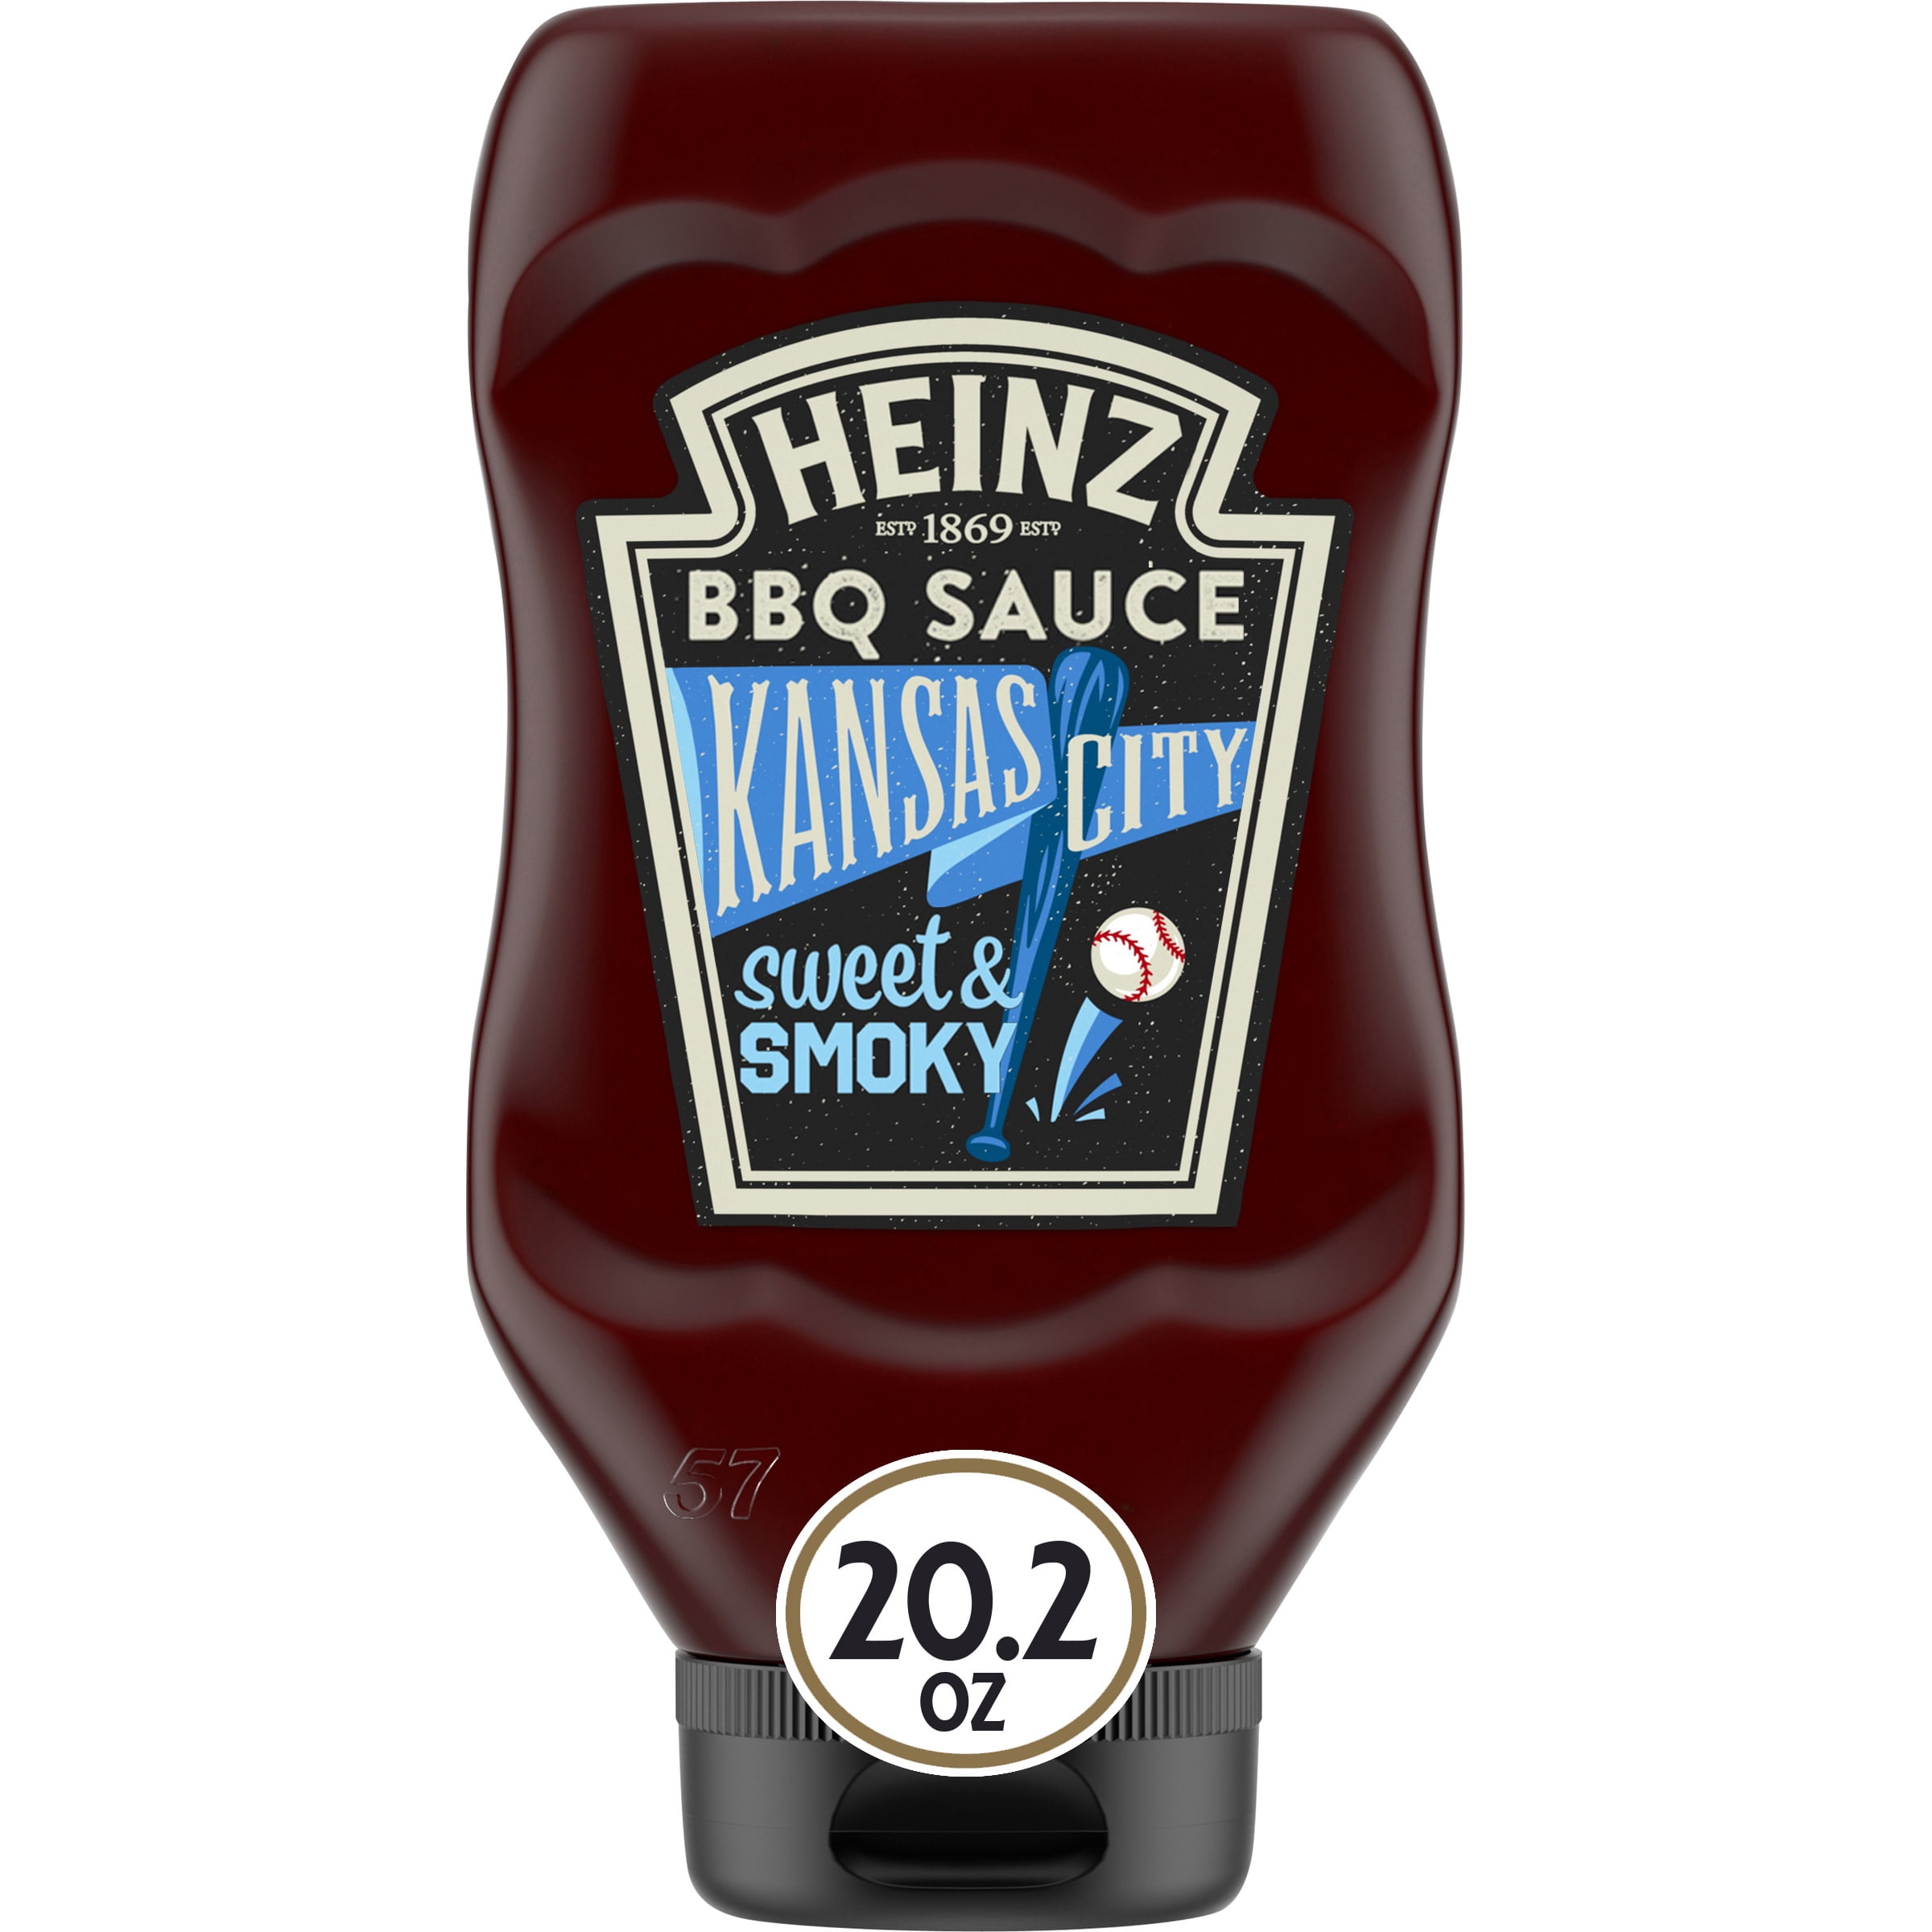 Top 15 Bbq Sauce Styles – Easy Recipes To Make at Home